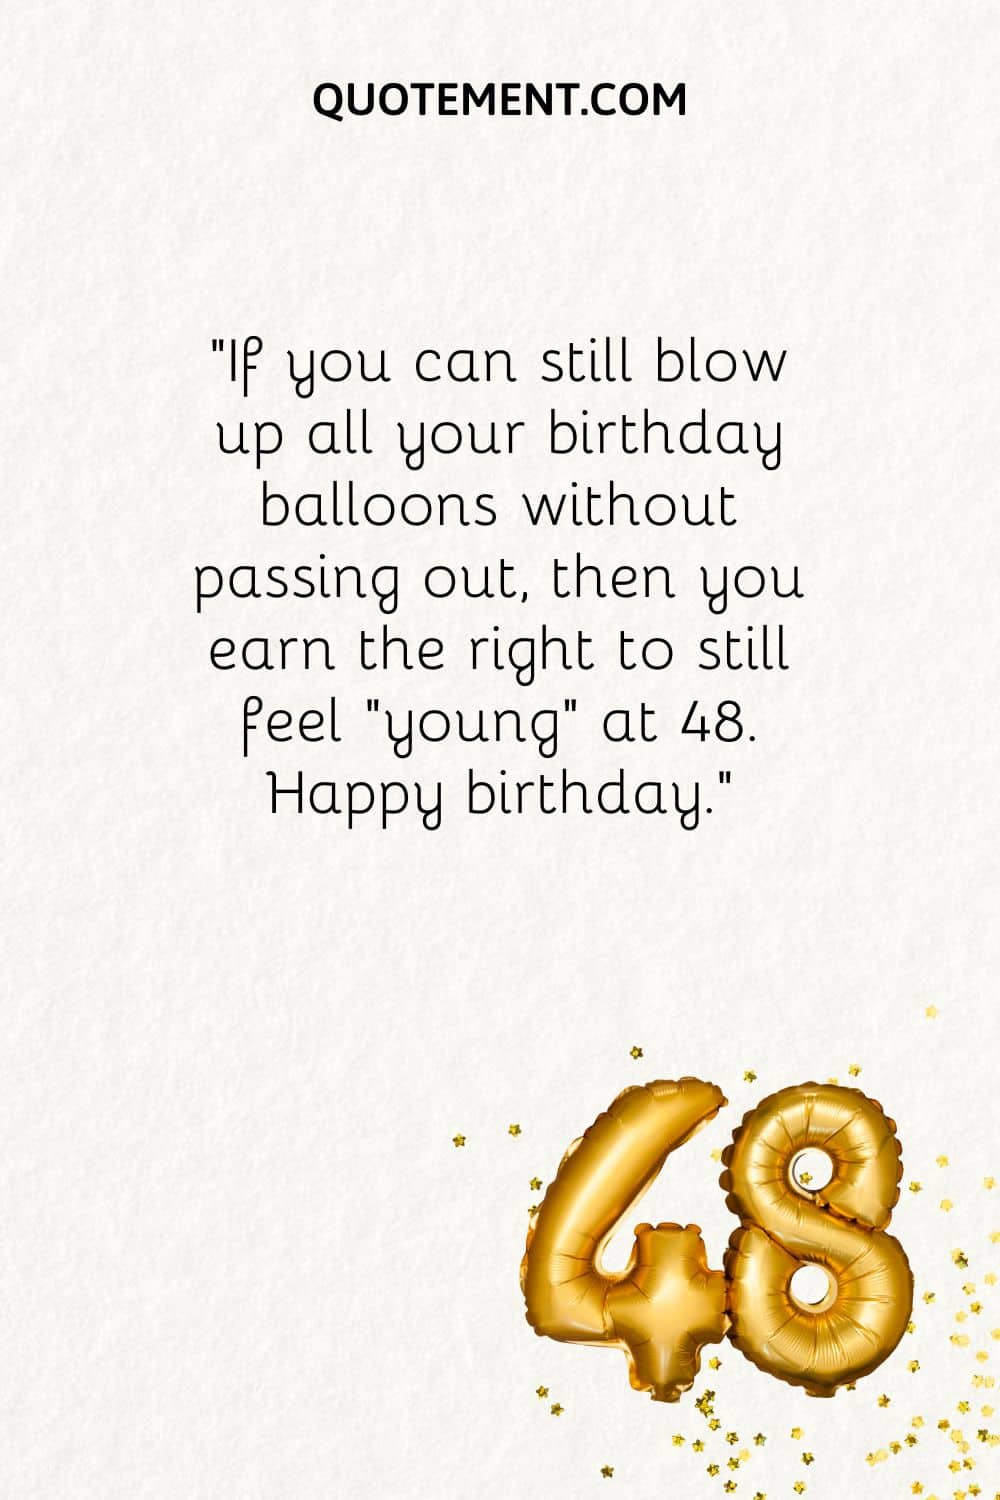 If you can still blow up all your birthday balloons without passing out, then you earn the right to still feel “young” at 48